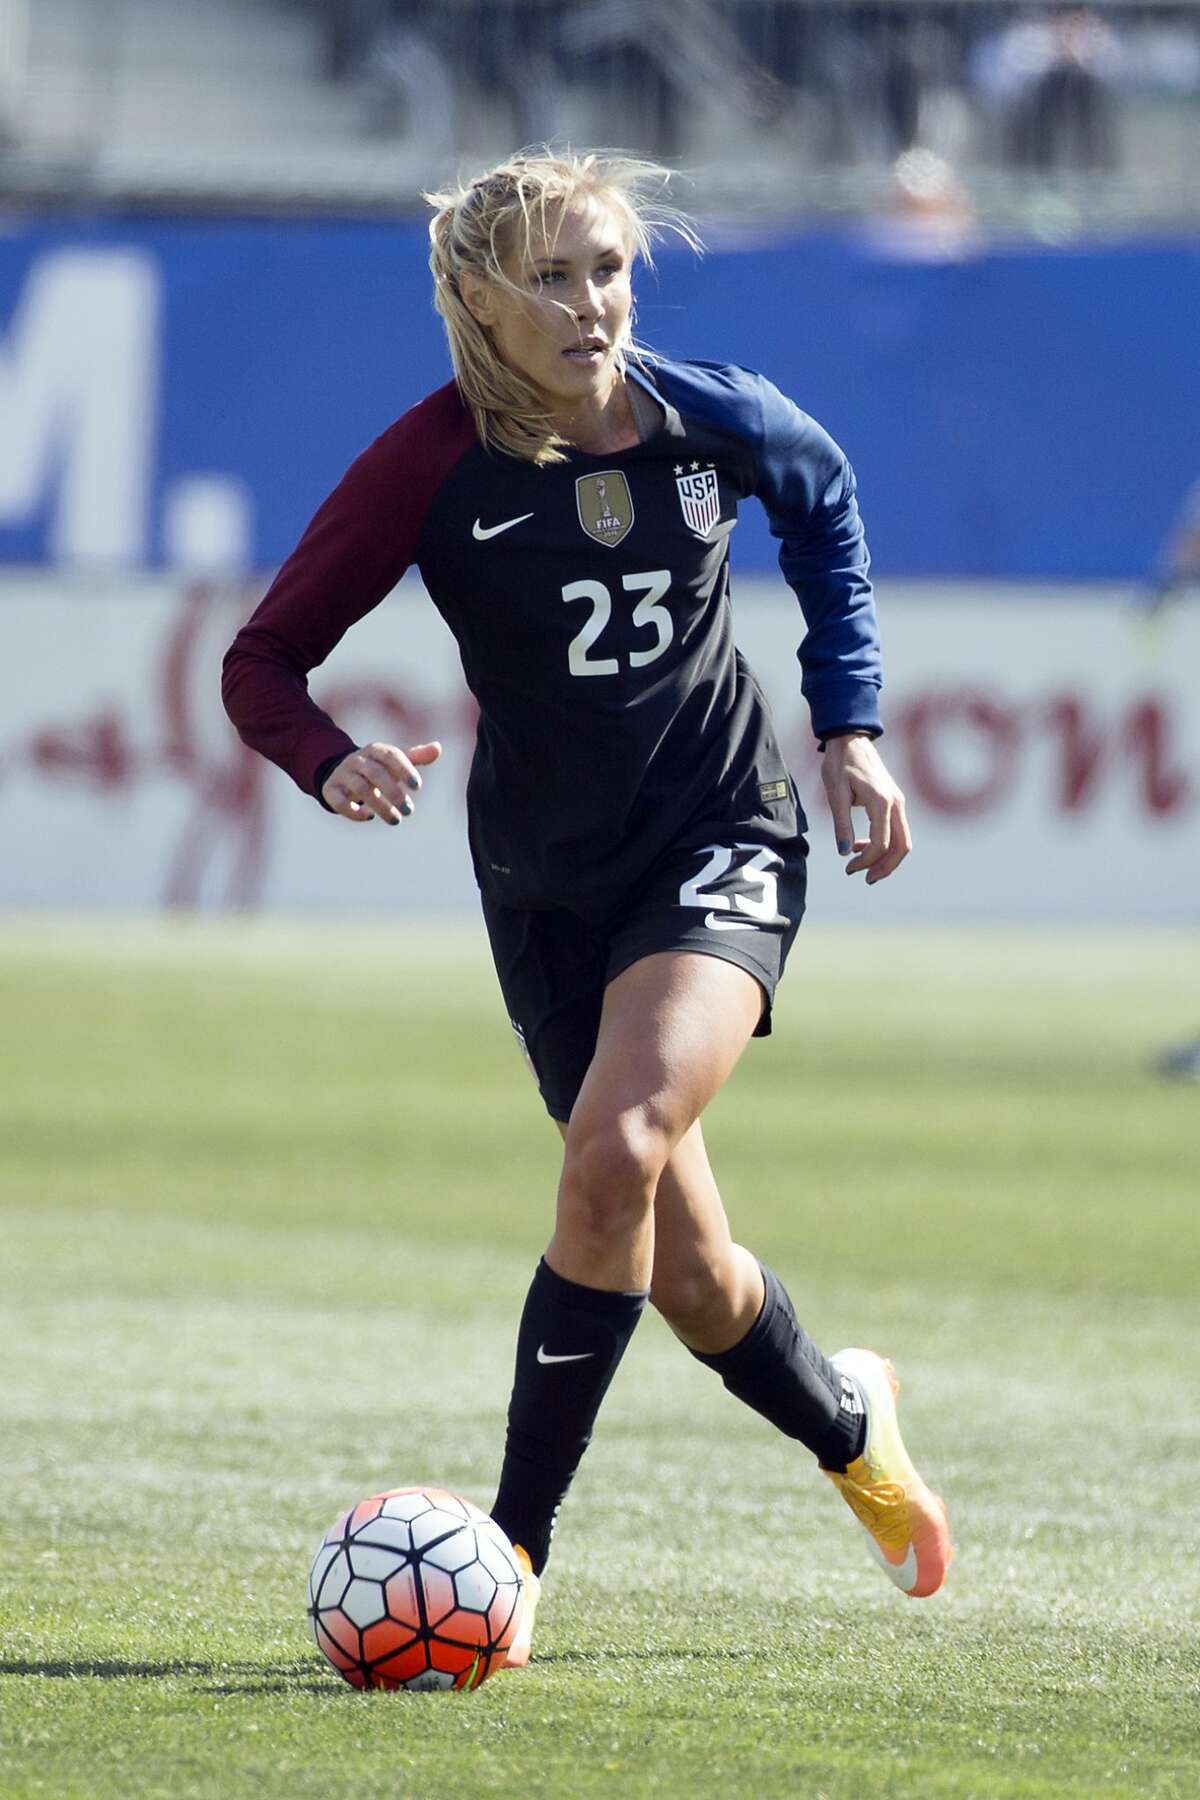 FILE - In this April 10, 2016, file photo, United States' Allie Long (23) dribbles the ball during the second half of an international friendly soccer match against Colombia in Chester, Pa. Long is among 23 players named to the team that was getting in its last three exhibition games this month before heading to Europe for the Women’s World Cup, which opens June 7. (AP Photo/Chris Szagola, File)